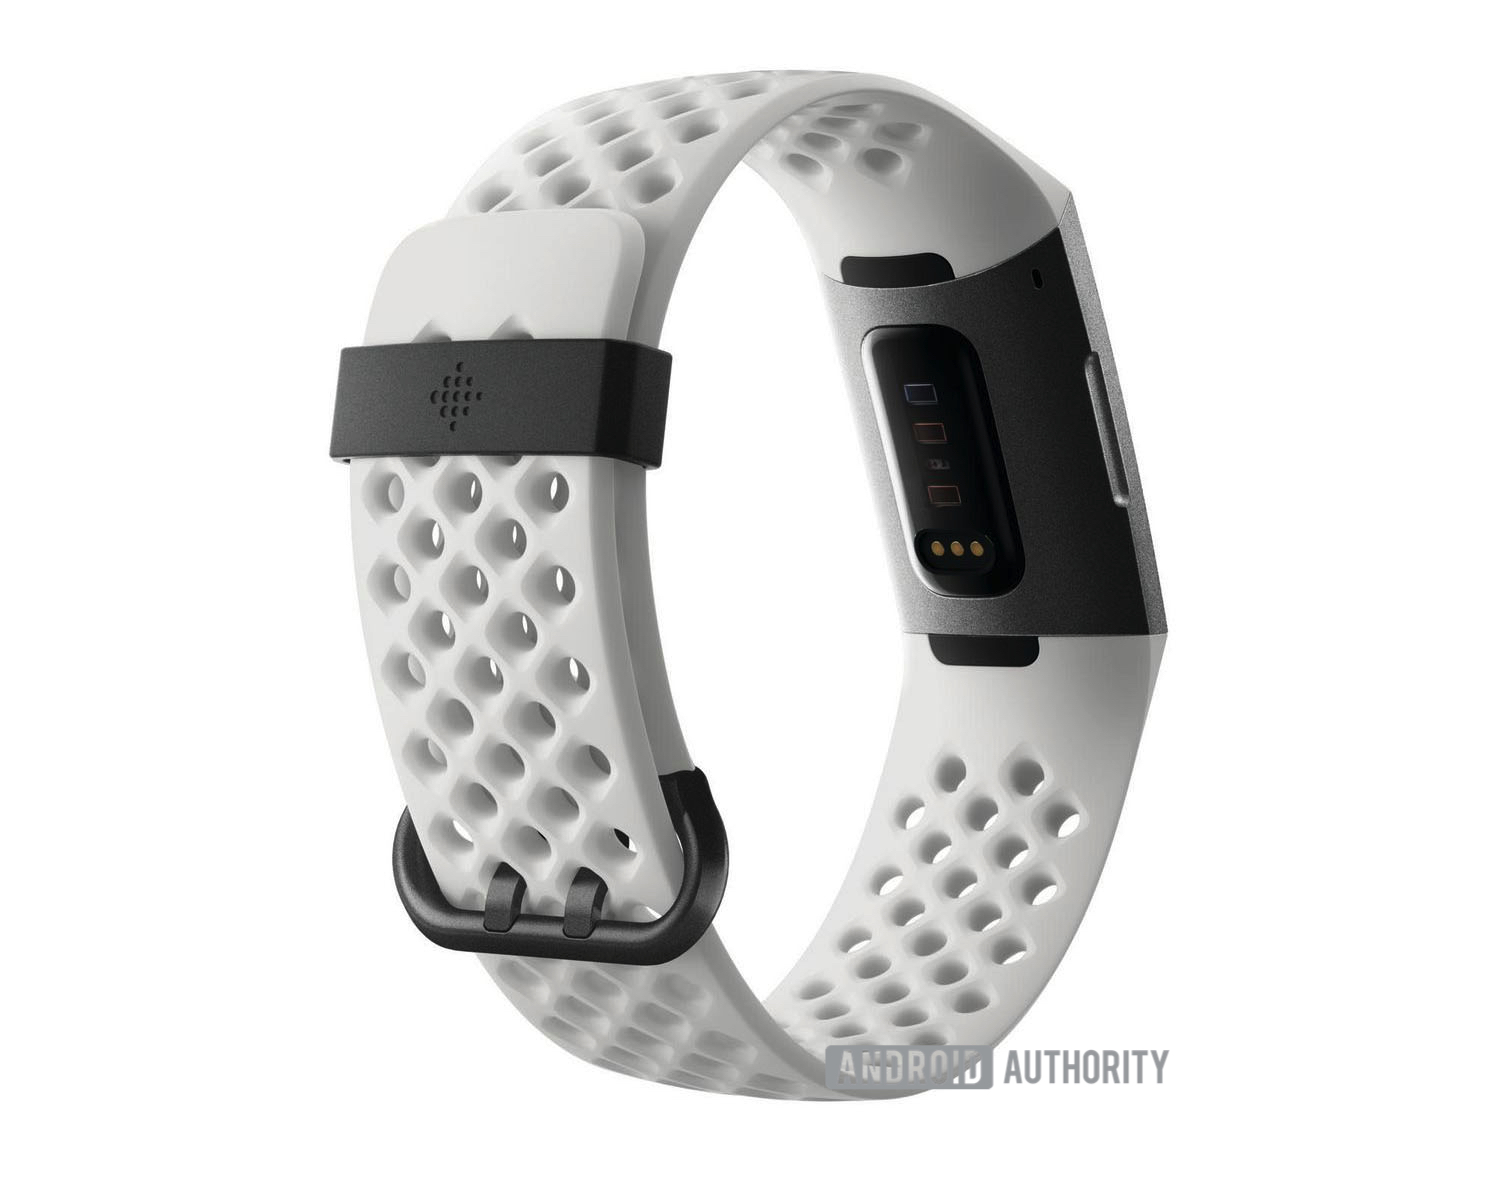 Fitbit Charge 3 is waterproof and features a full touchscreen, leak